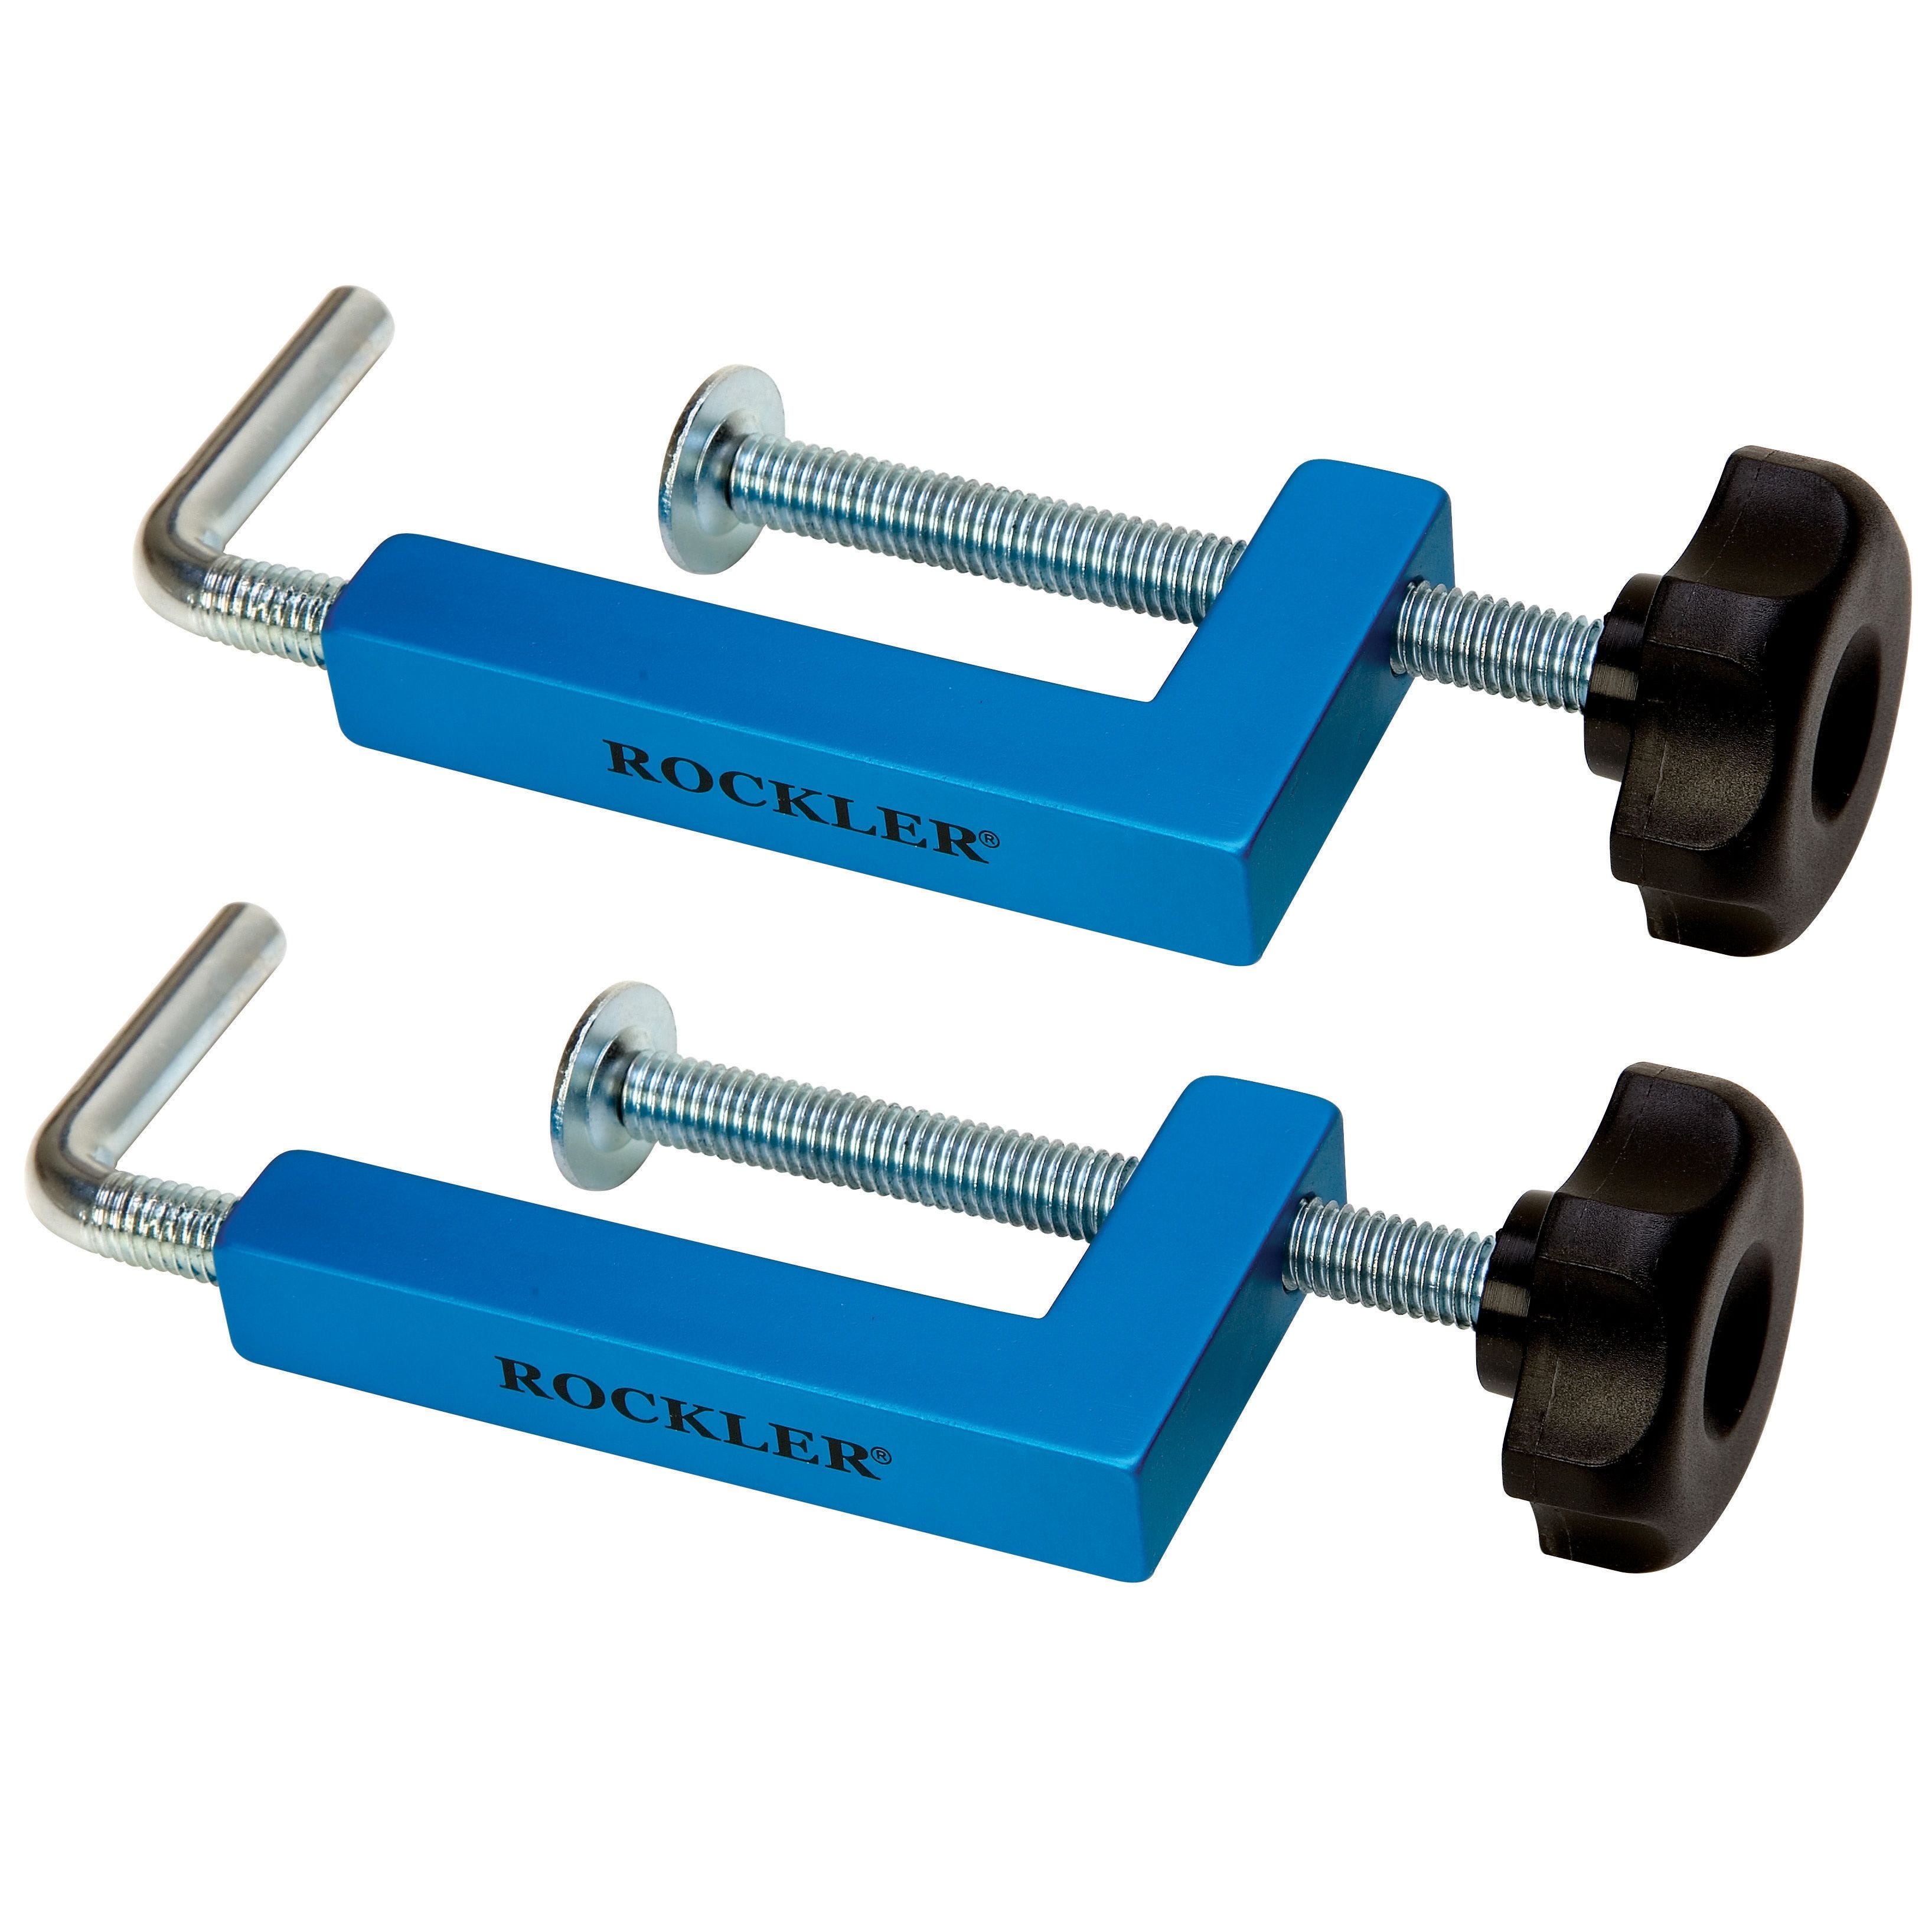 Universal Fence Clamps by Rockler 